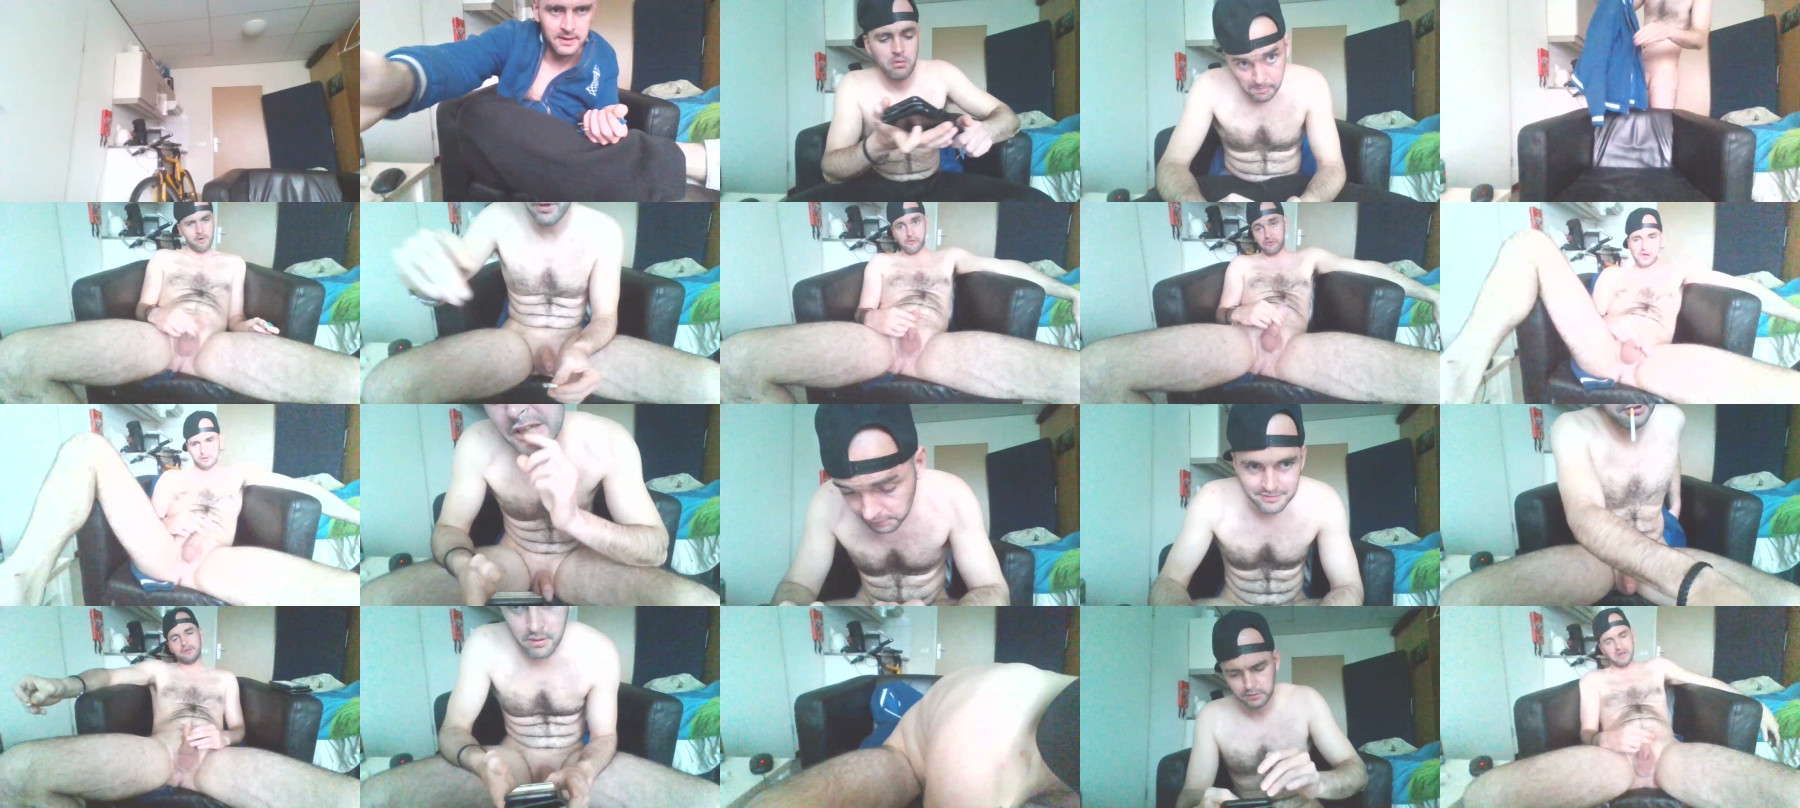 Sean20755  09-05-2021 Recorded Video Topless